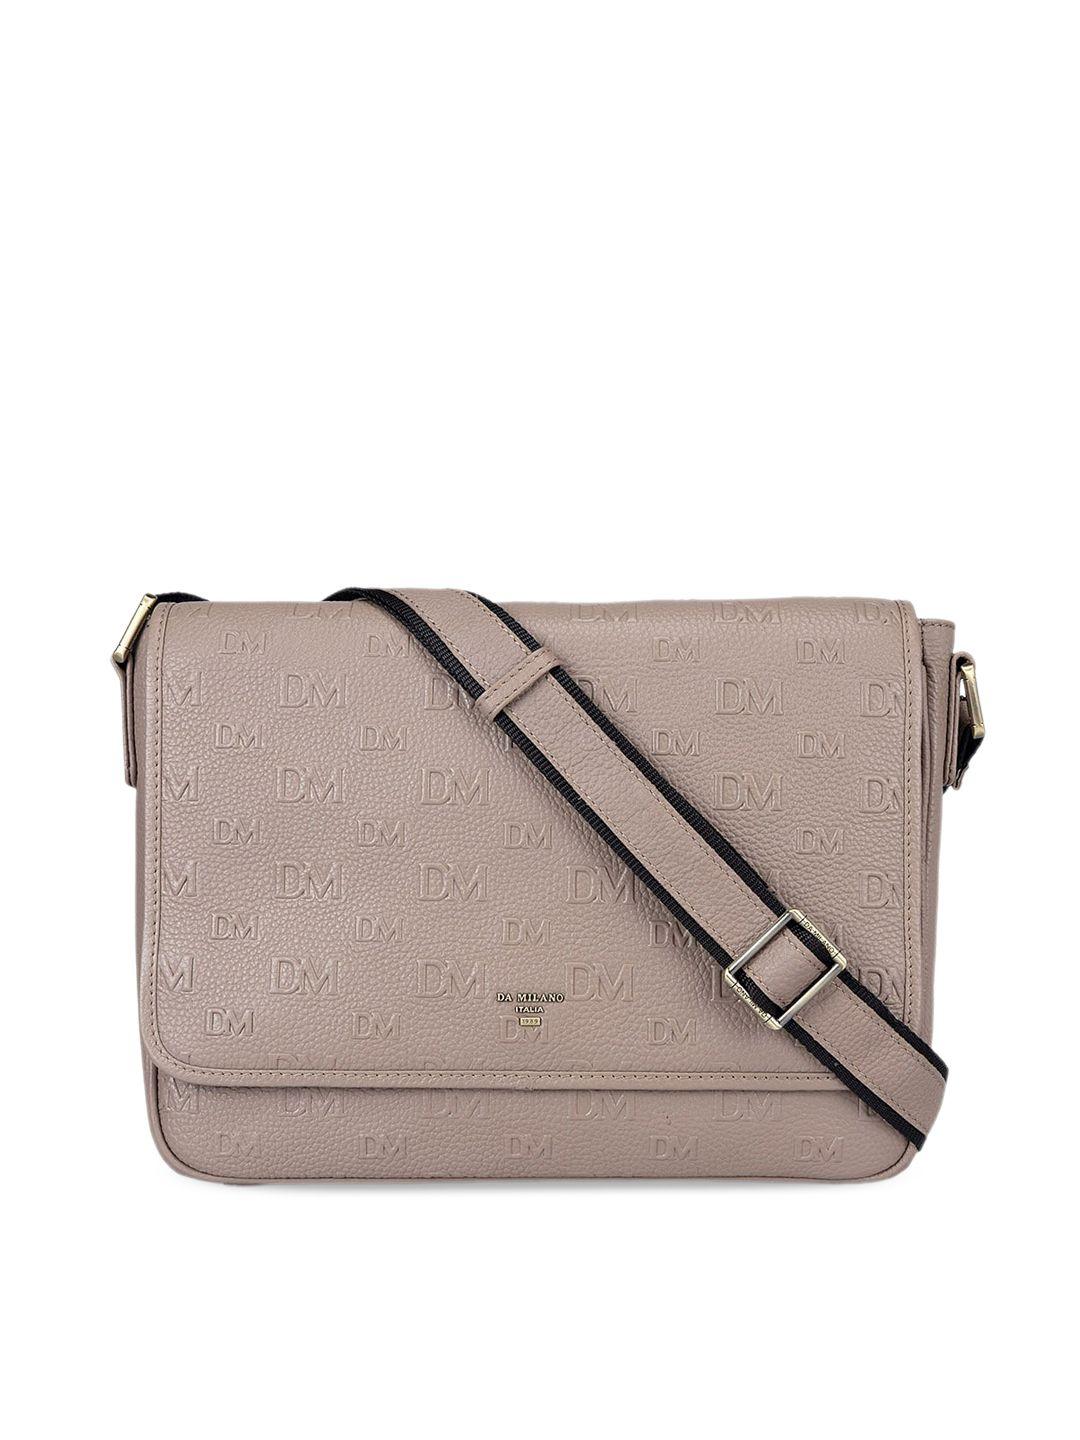 da milano textured leather structured sling bag